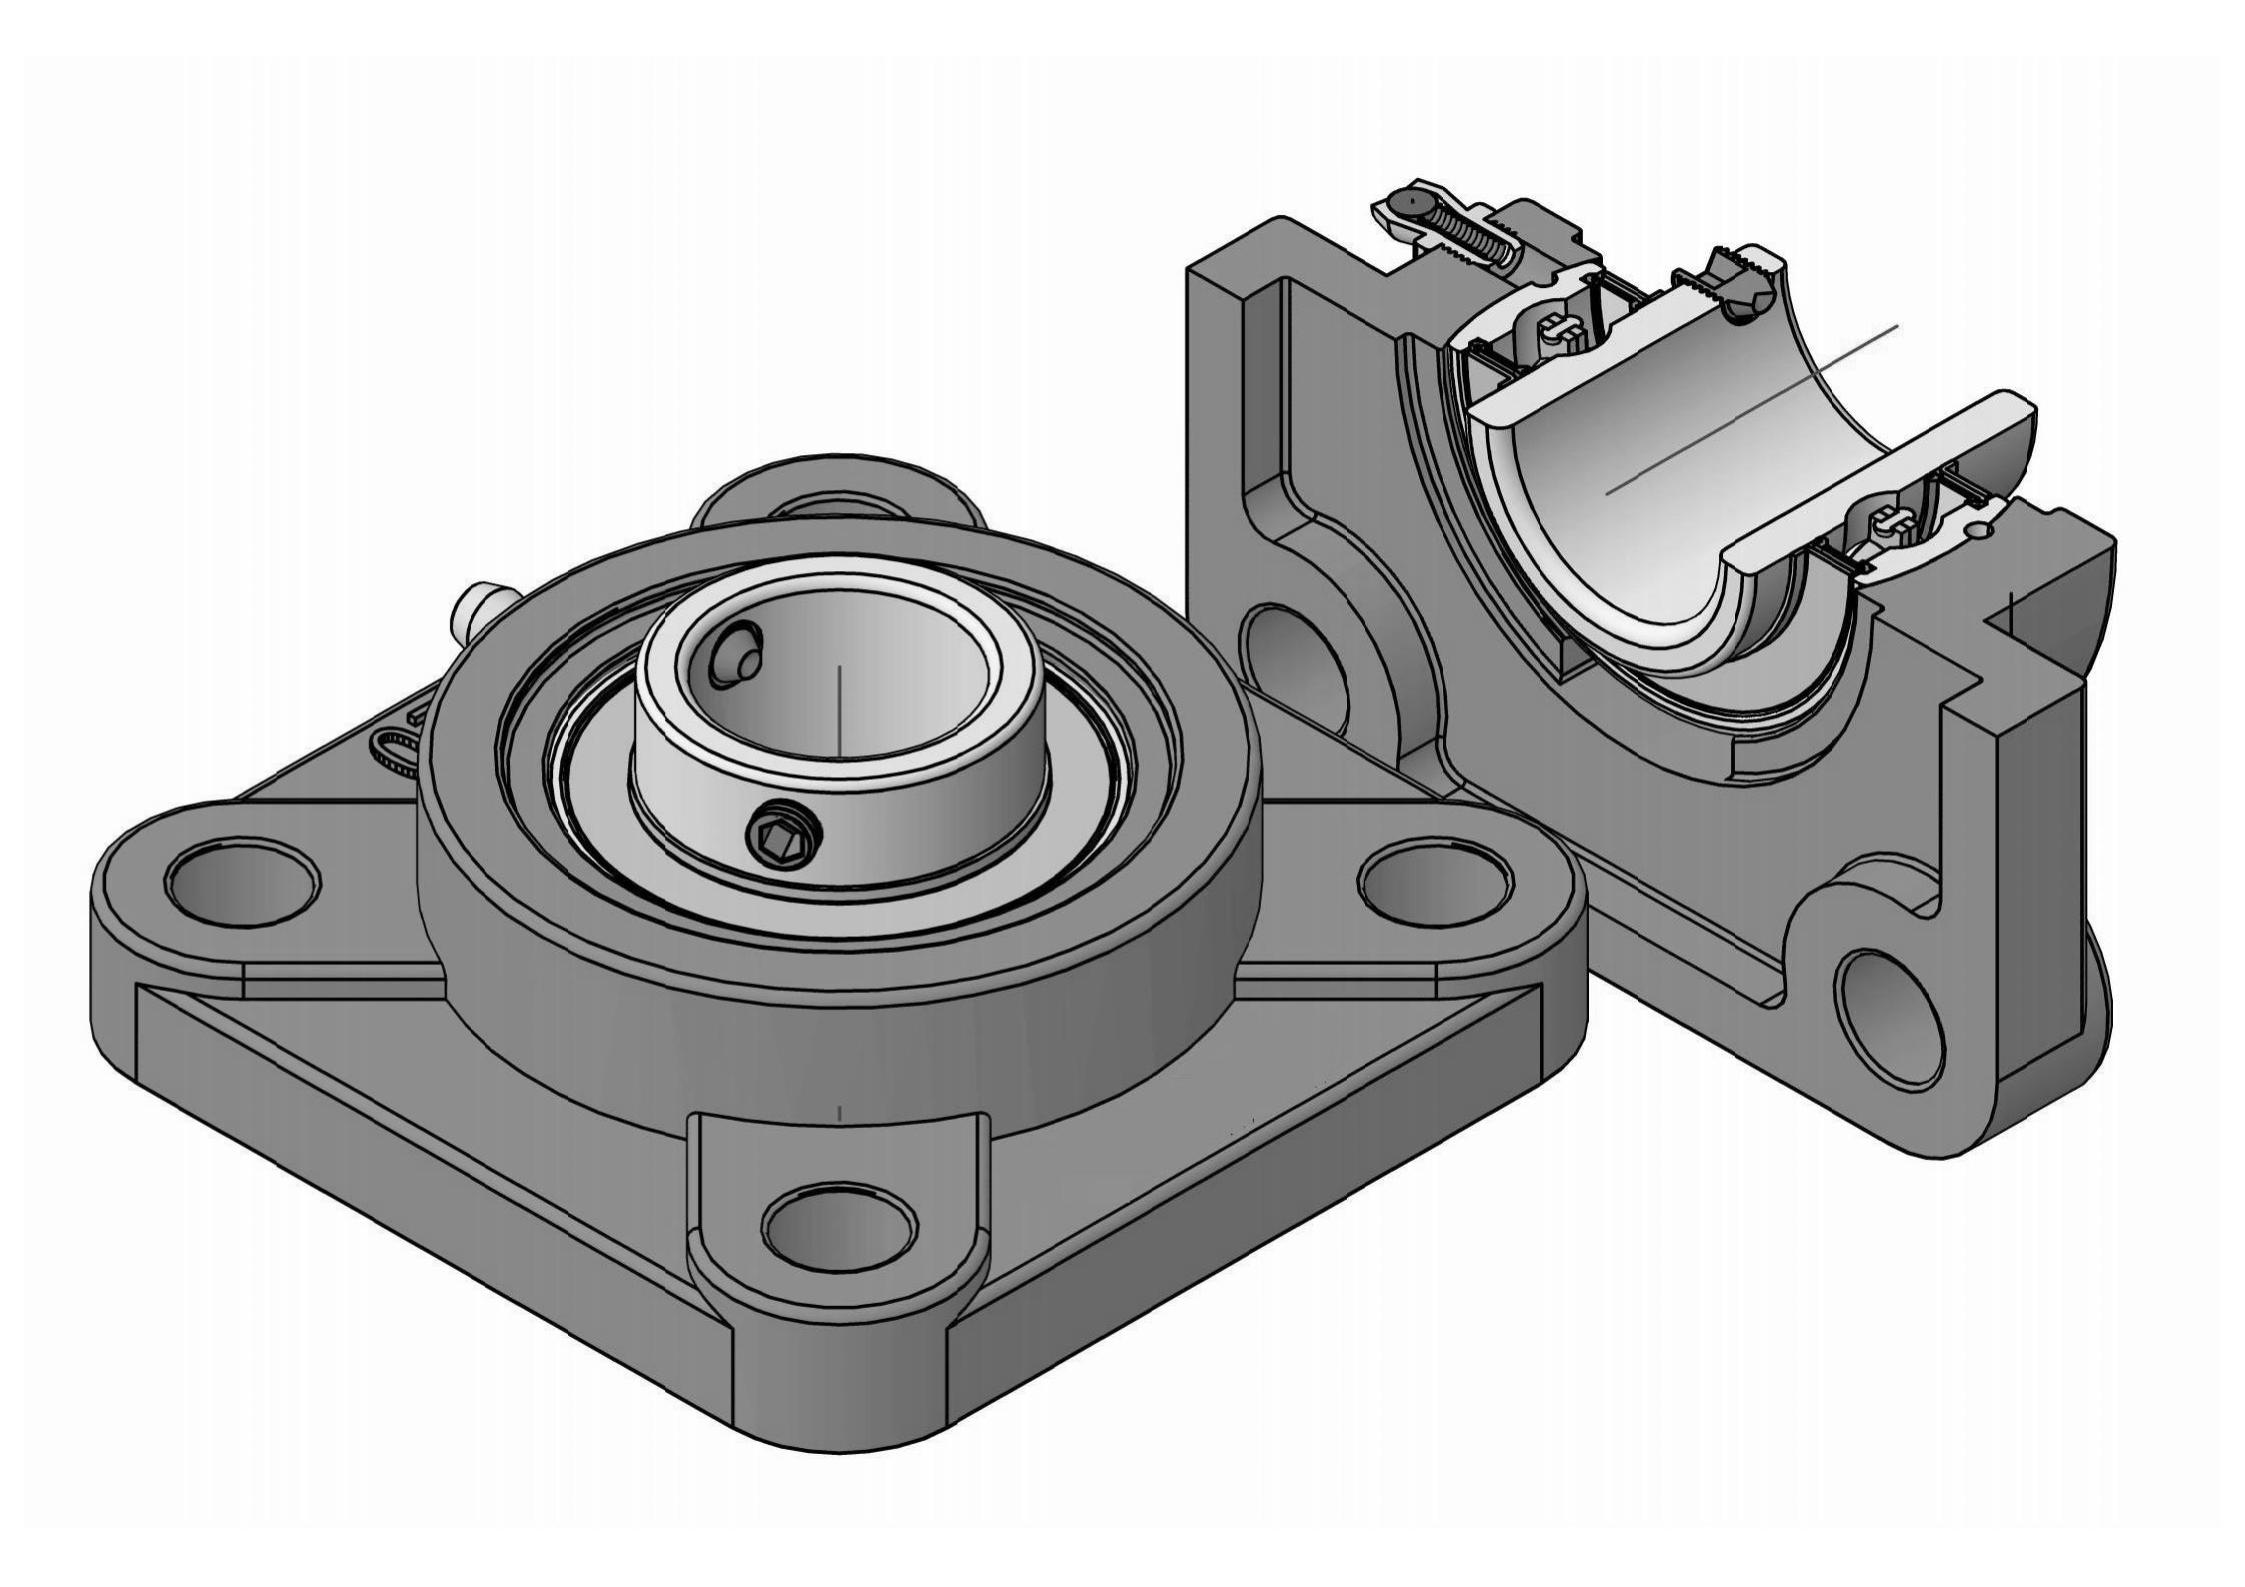 UCFX07-22 four Bolt Square flange bearing units with 1-3/8 inch bore